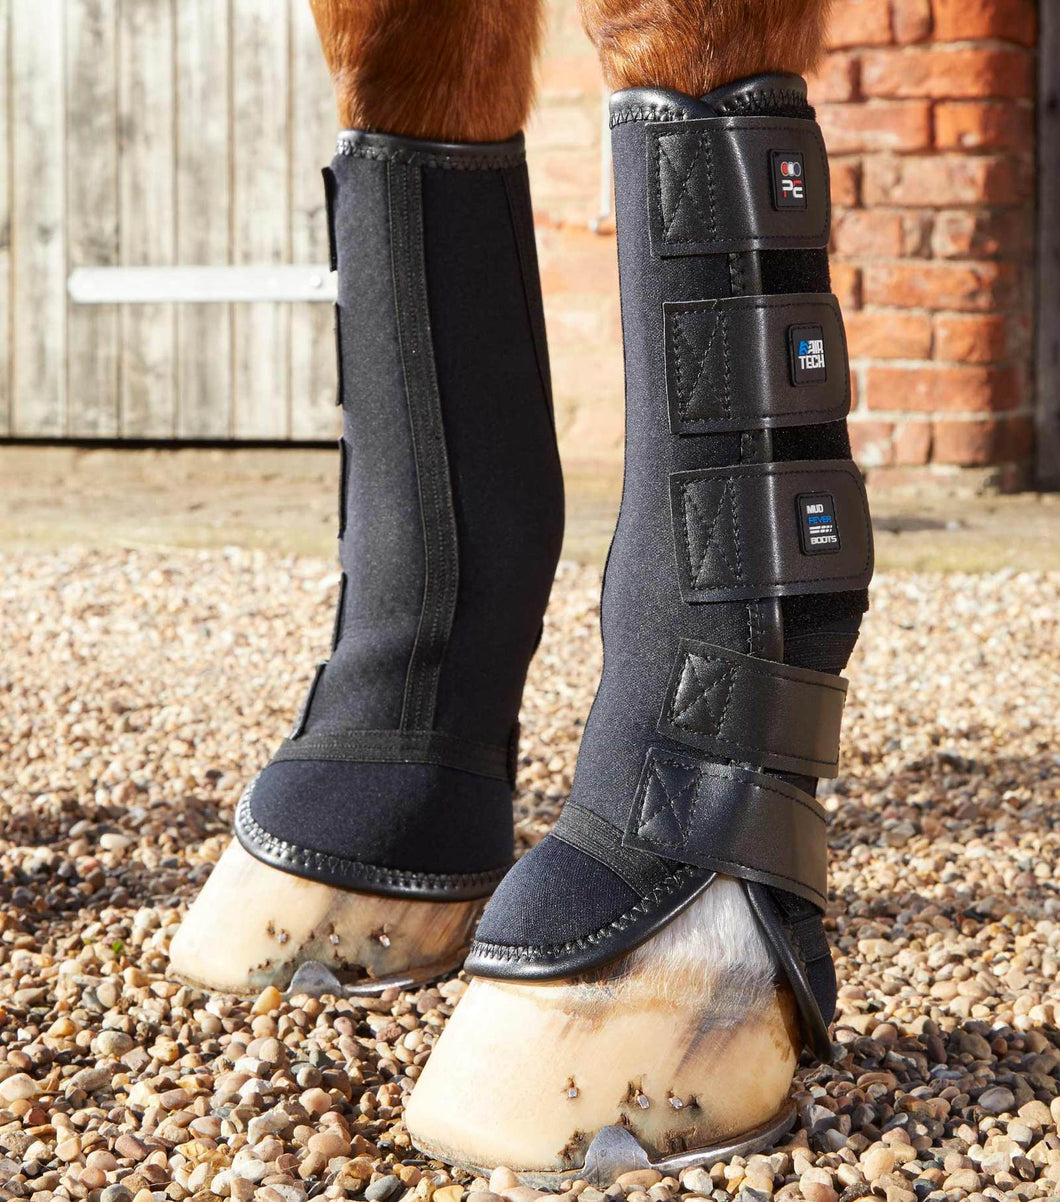 Premier Equine Turnout Mud Fever Boots. Horse Turnout Boots